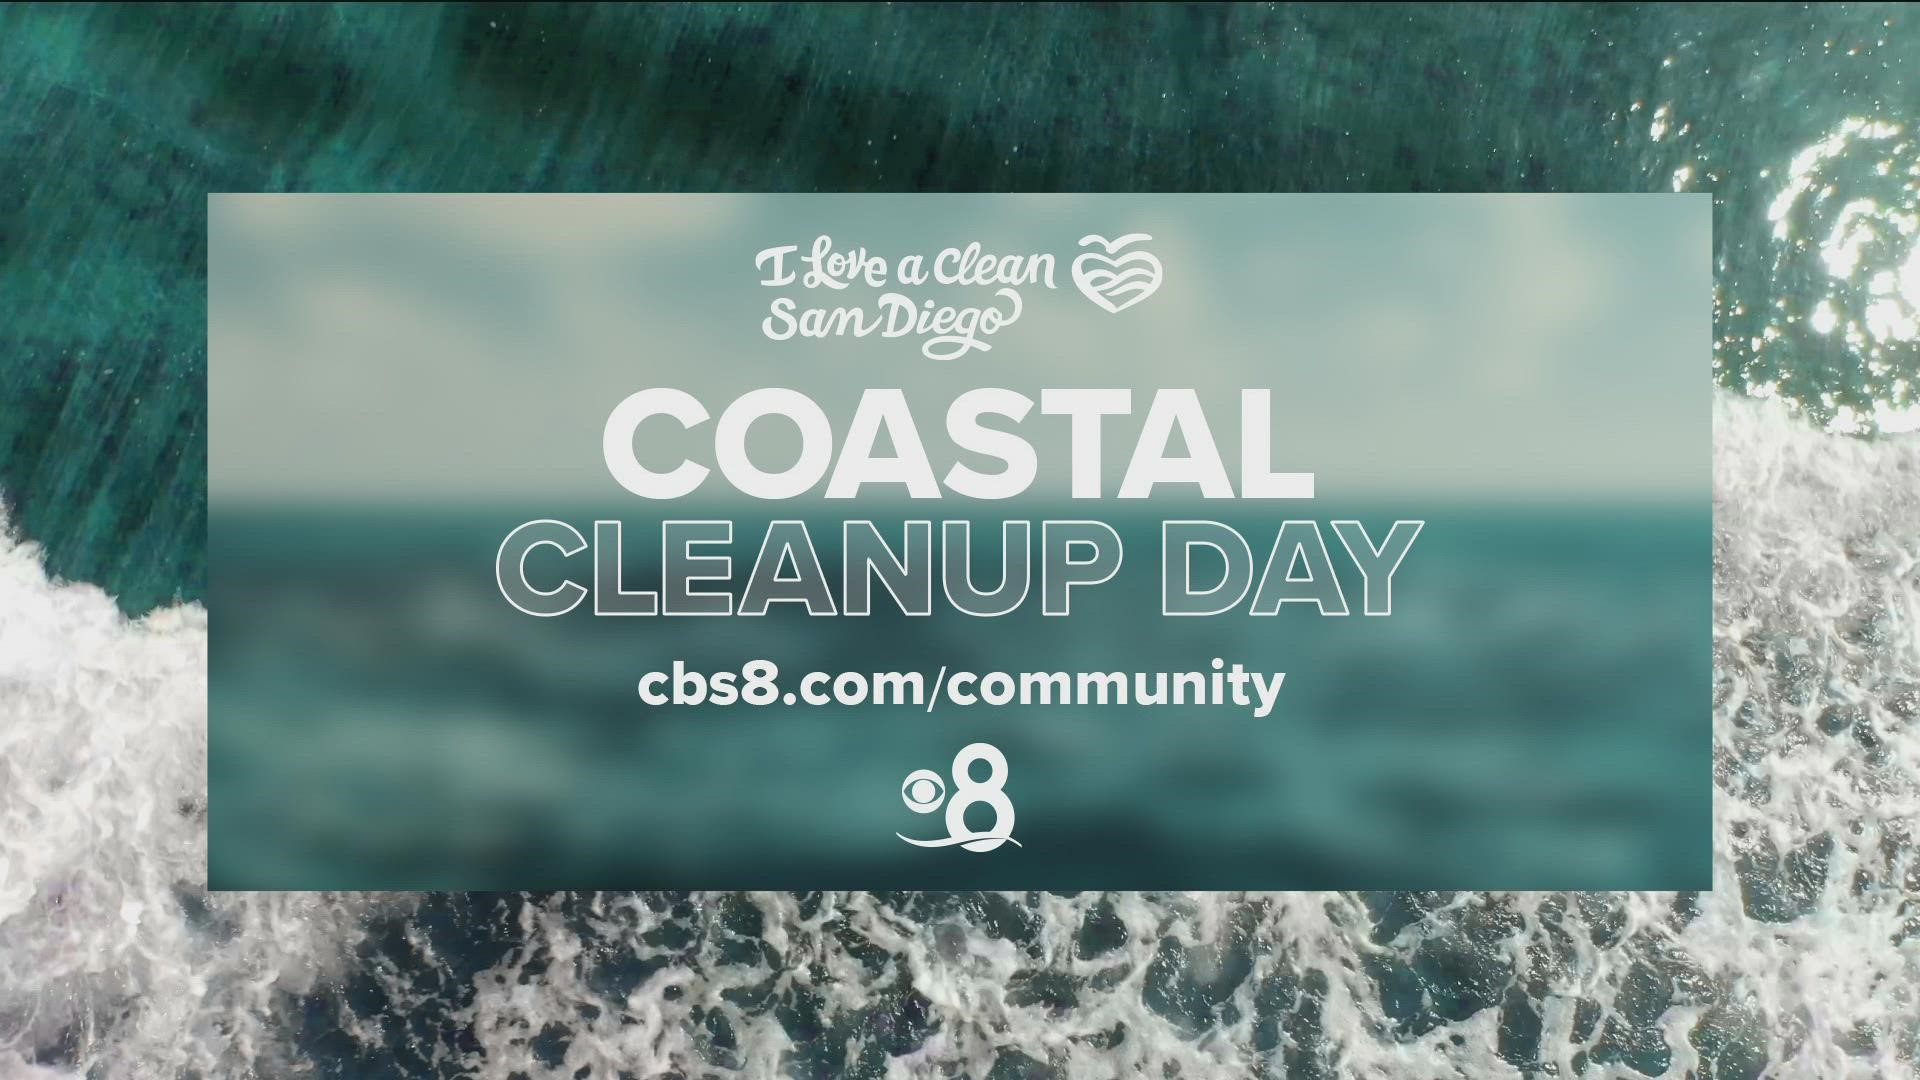 Come join CBS 8 and the community for the global coastal cleanup day in San Diego County.